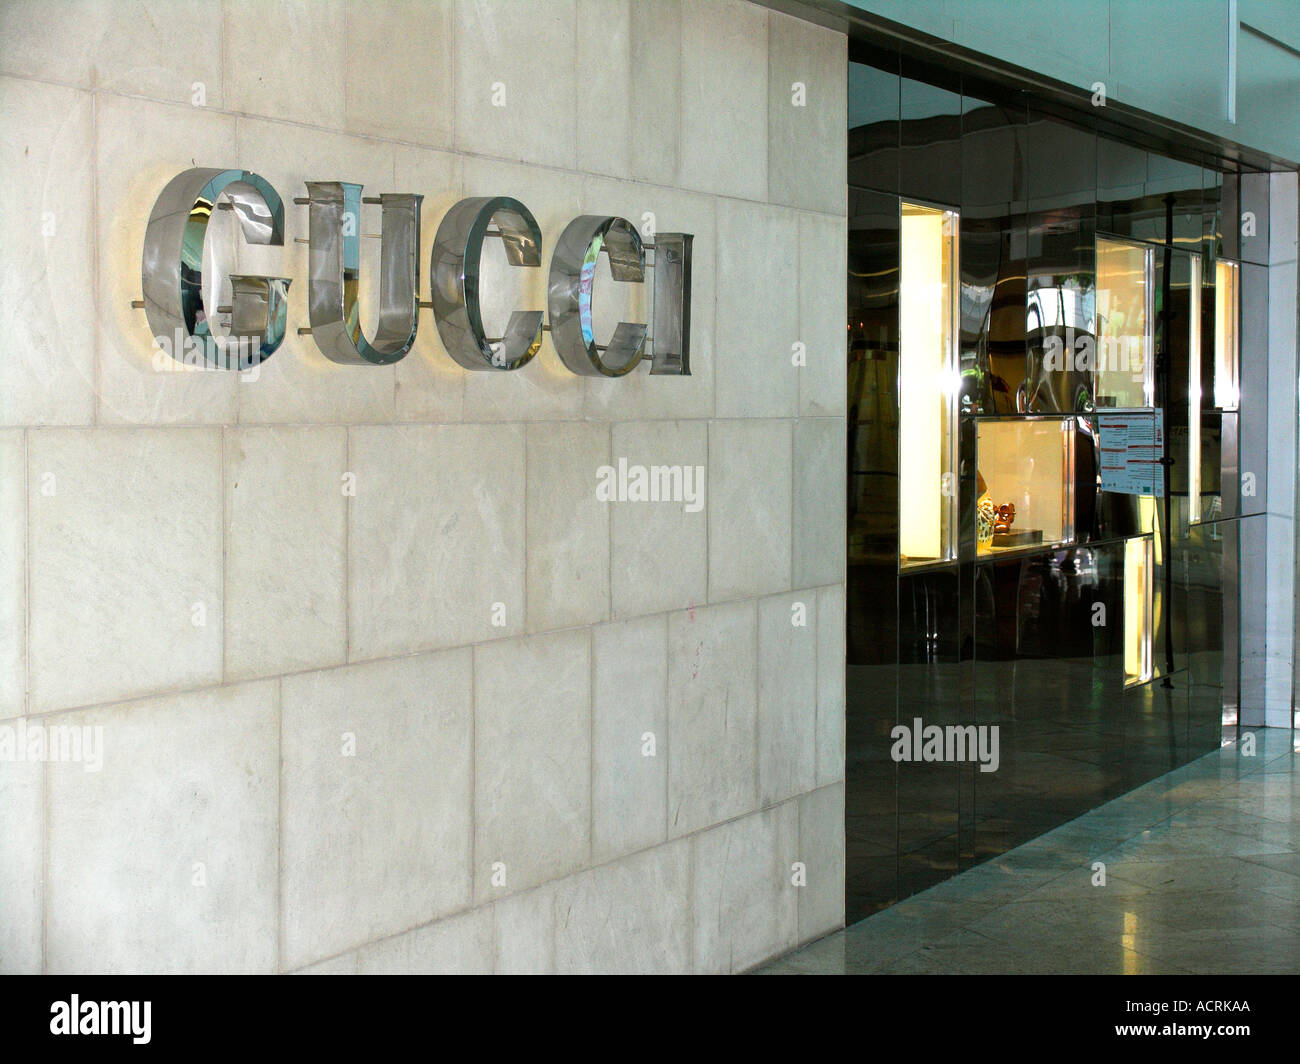 Designer shop front Gucci Orchard Road Singapore Stock Photo: 4315049 - Alamy